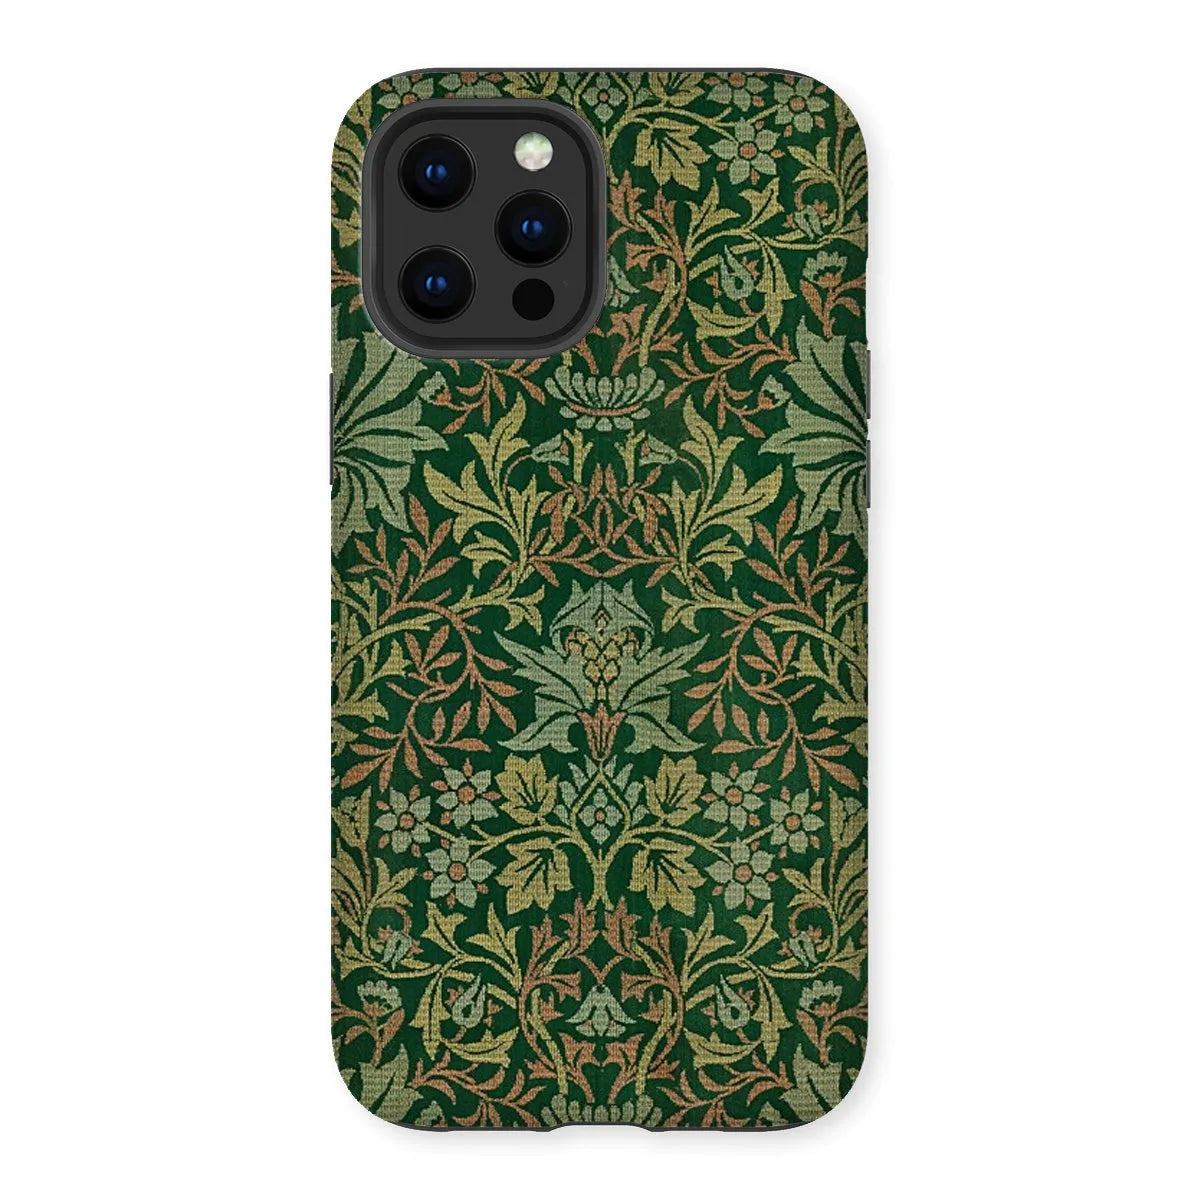 Flower Garden Aesthetic Pattern Phone Case - William Morris - Iphone 12 Pro Max / Gloss - Mobile Phone Cases